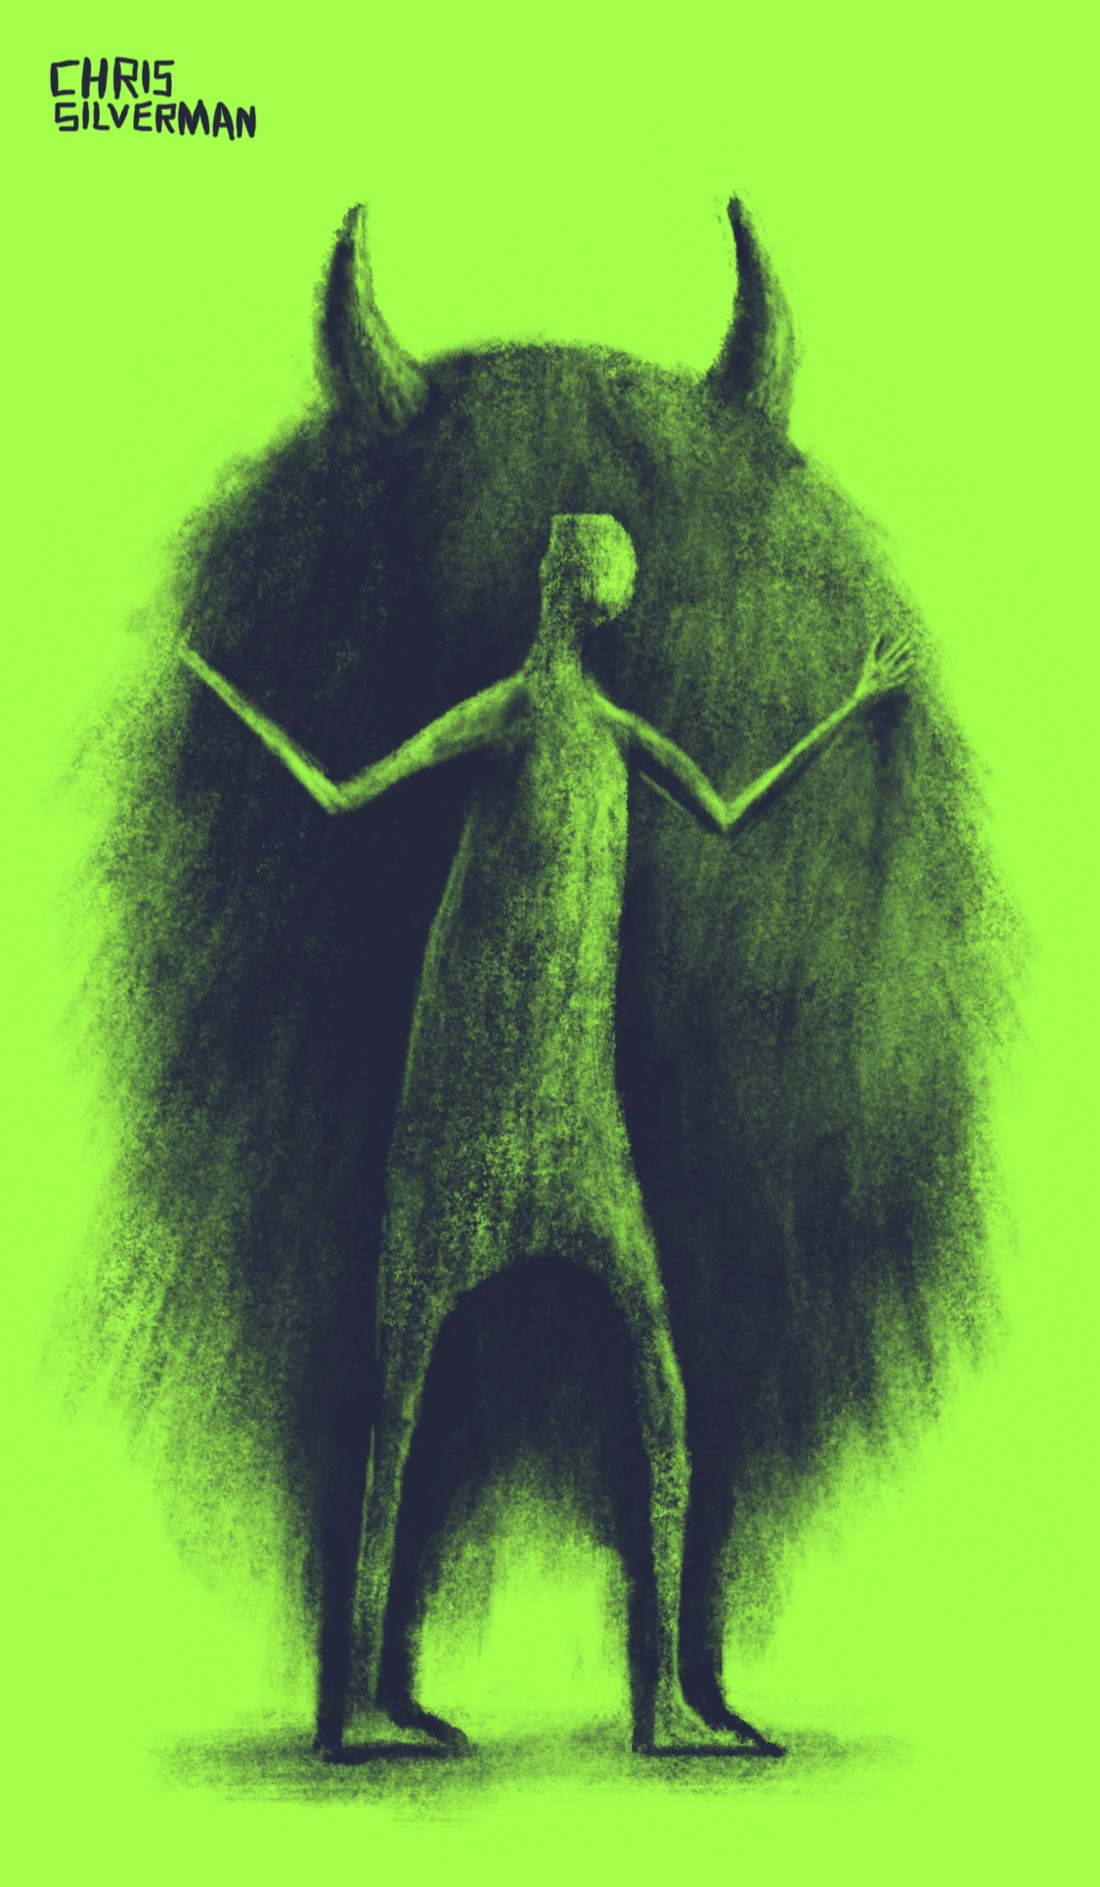 A tall, thin person, standing with arms apart. The person does not have any visible facial features. The person is surrounded by a dark, amorphous shape that could either be a hole or something that the person is wearing; there are two three-dimensional horns on top of the darkness, but the body appears to be a cavelike entrance. The edges of the shape are blurry; if you saw only the silhouette of the darkness and nothing else, you would think it was a large, round, furry monster with horns, two legs, and no arms. The drawing is black pencil on a light green background.